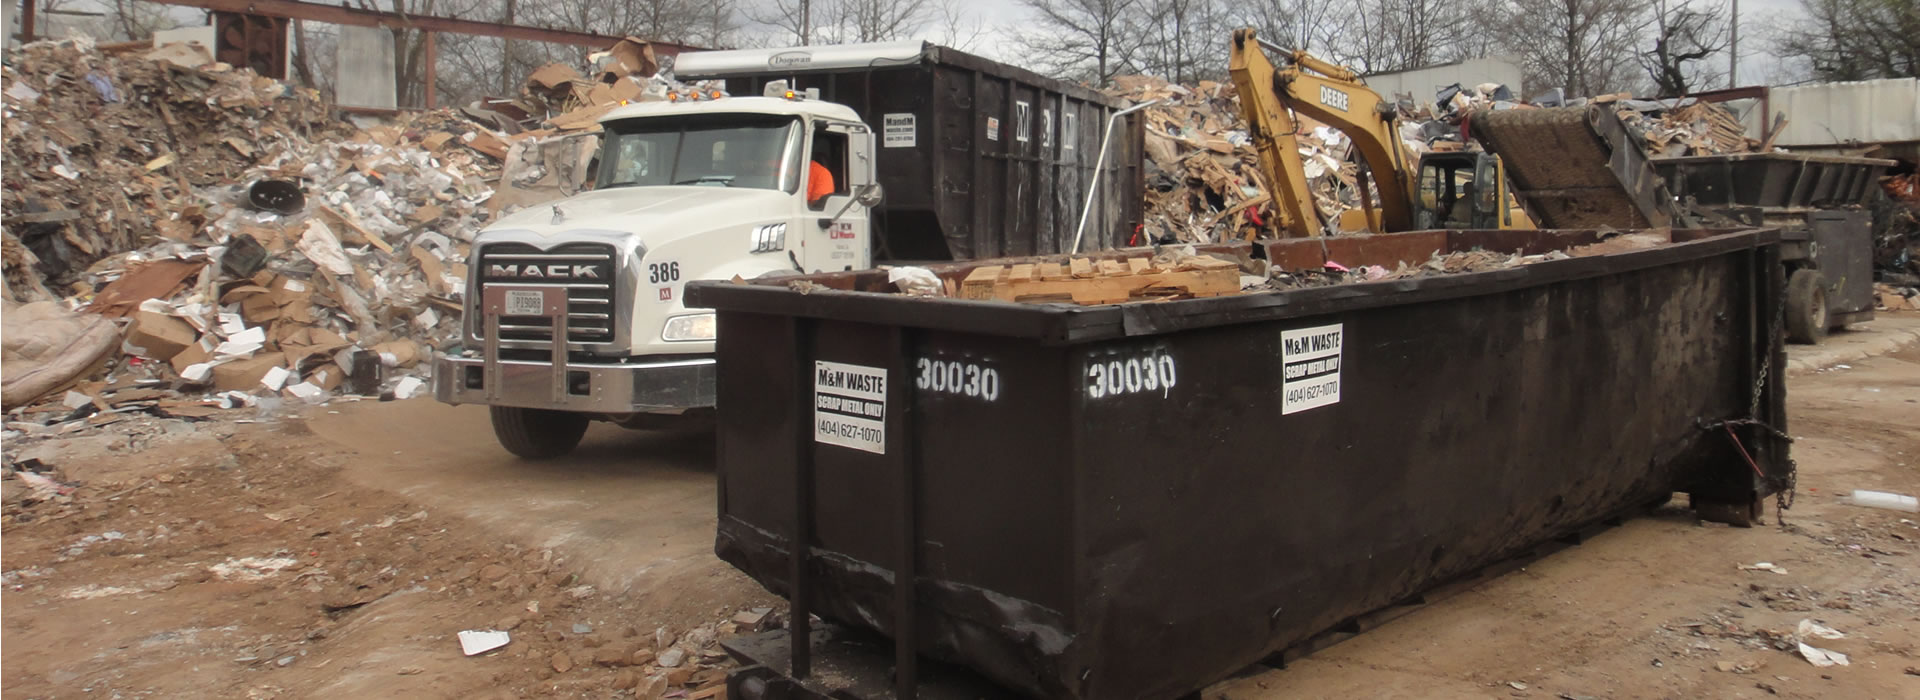  How to Get Rid of Demolition Waste?